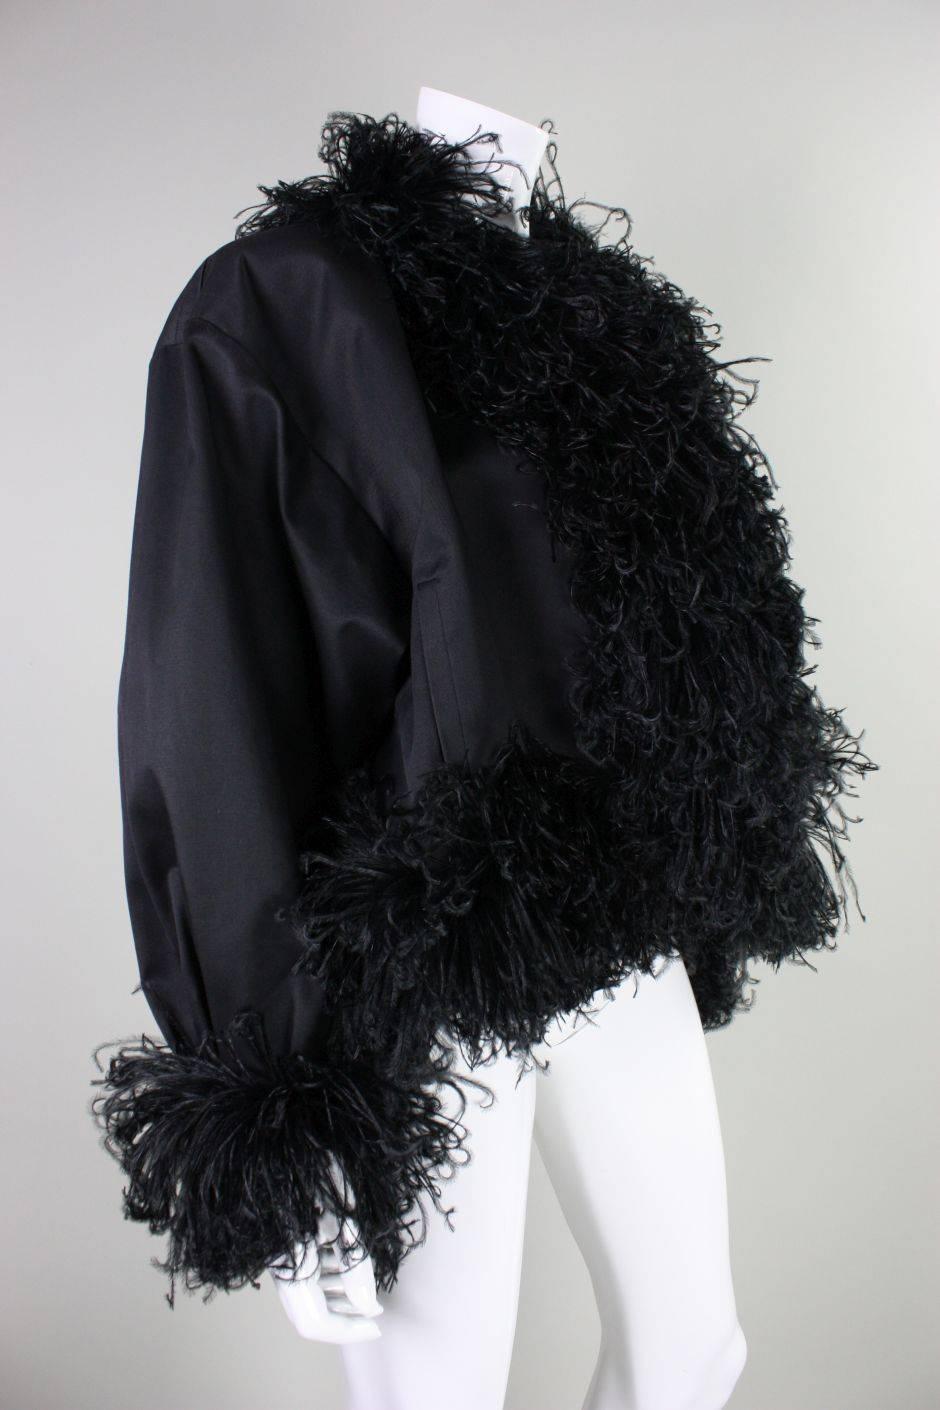 Vintage jacket from Yves Satin Laurent dates to the 1980's and is made of thick black cotton twill with flirty ostrich feather trim.  Dolman sleeves.  Fully lined.  No closures.  Side pockets at waist.  Padded shoulders.

Labeled a size 36, but this